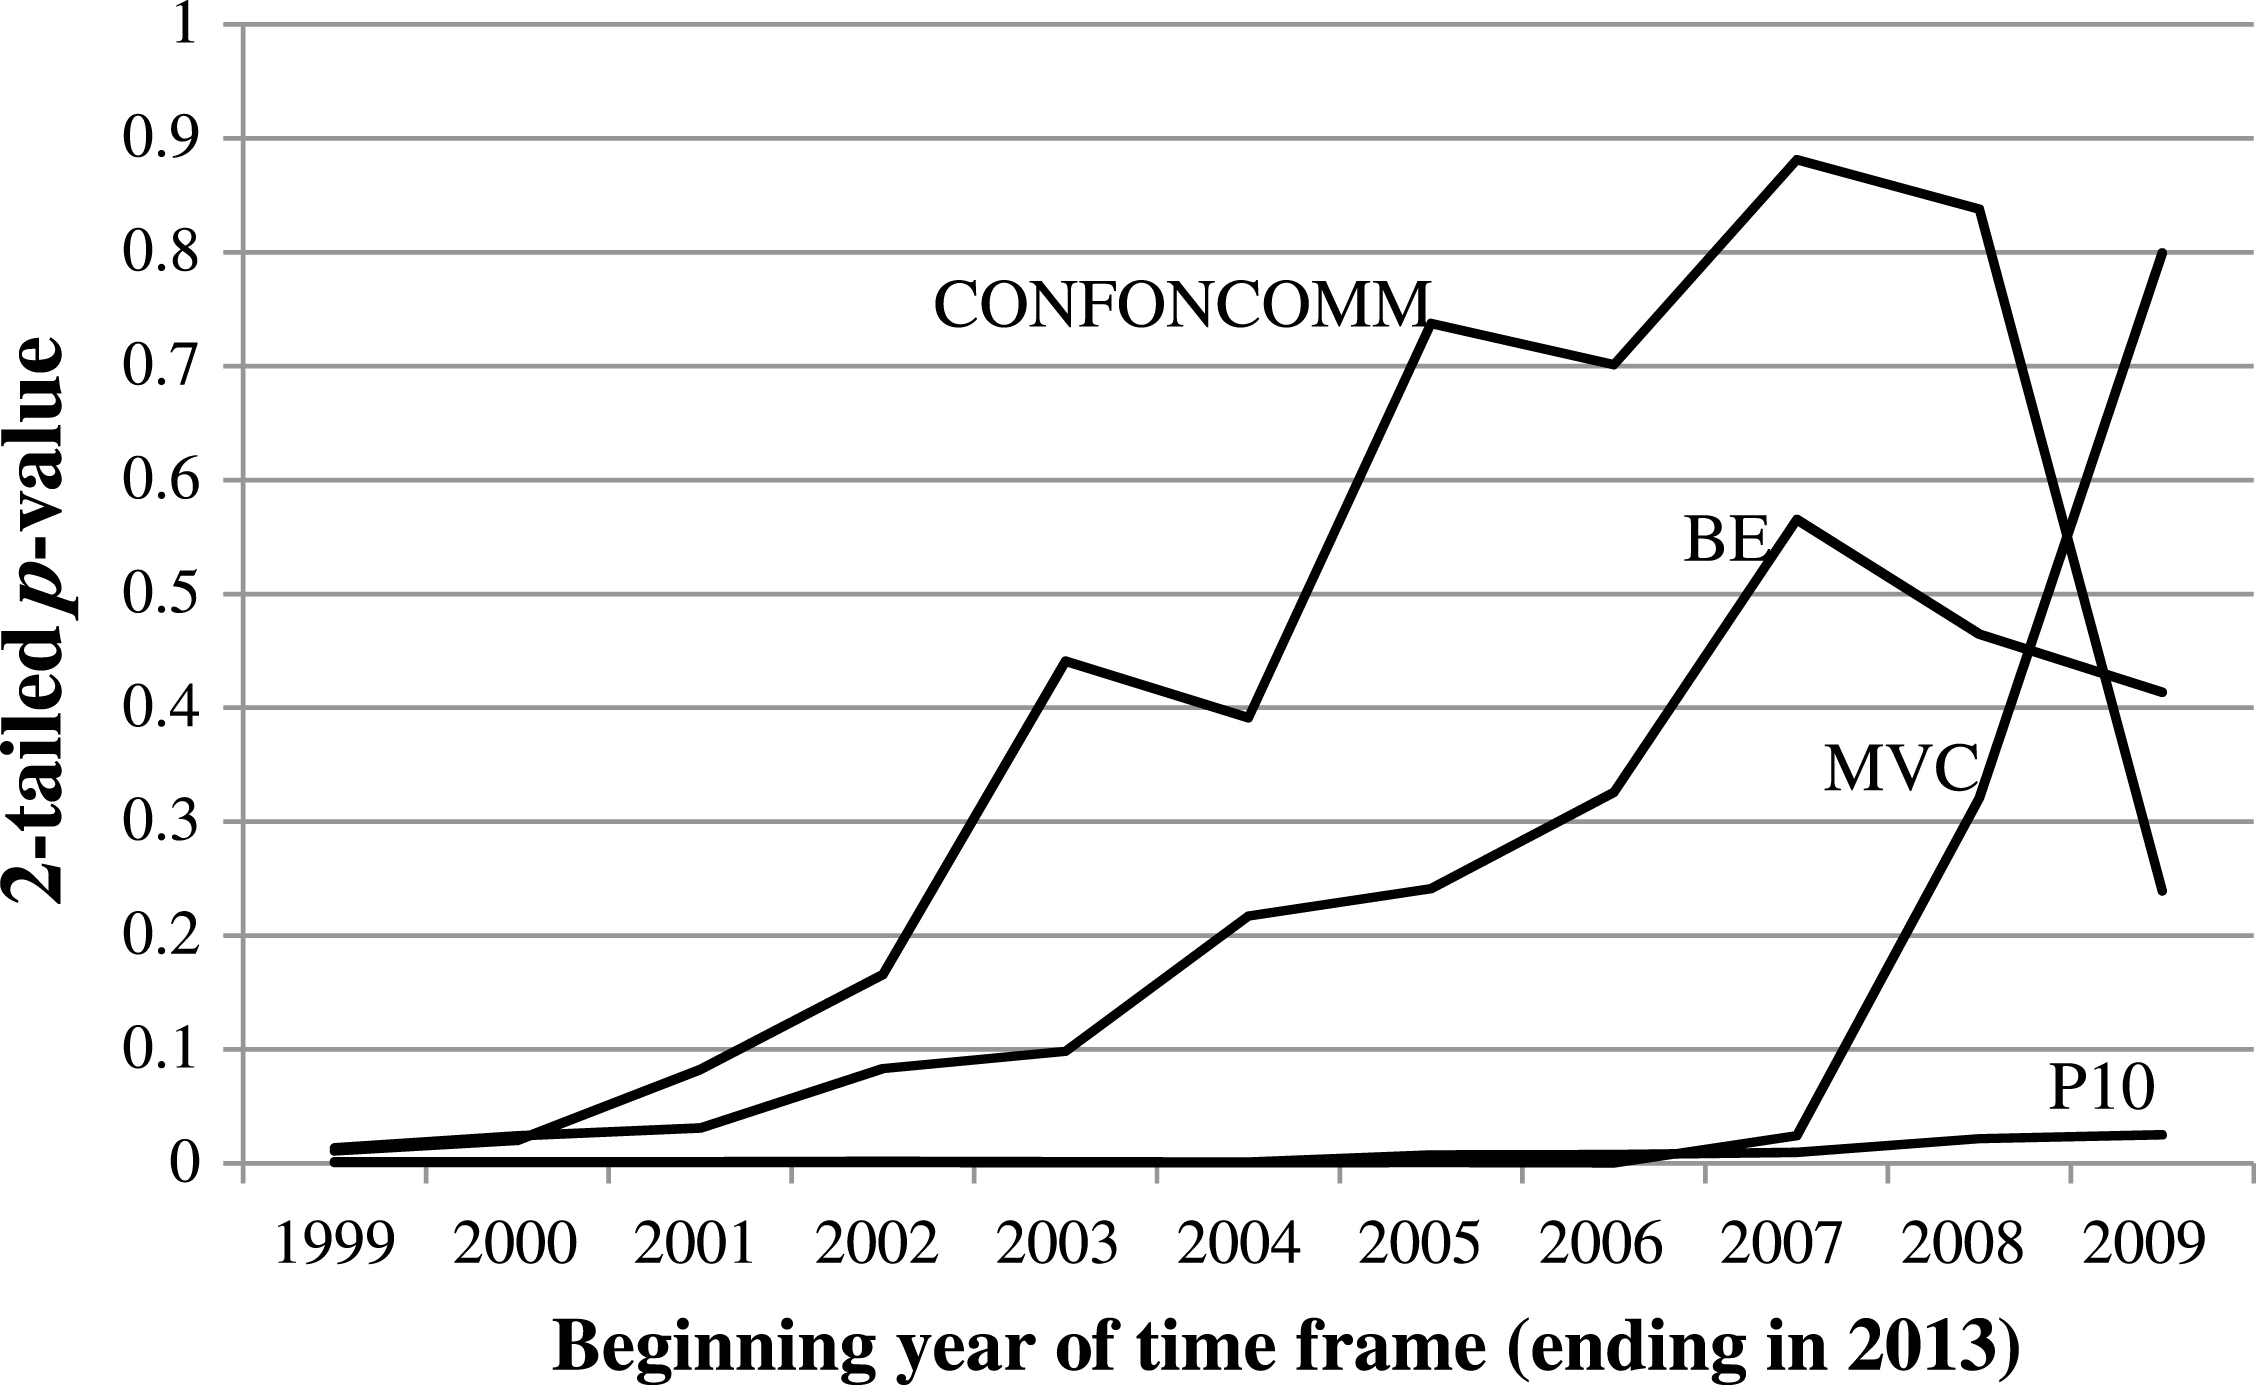 p-values of conference and committee representation factors found to be significant during 1999–2013 when added to equation (1), when fit to progressively shorter time frames.